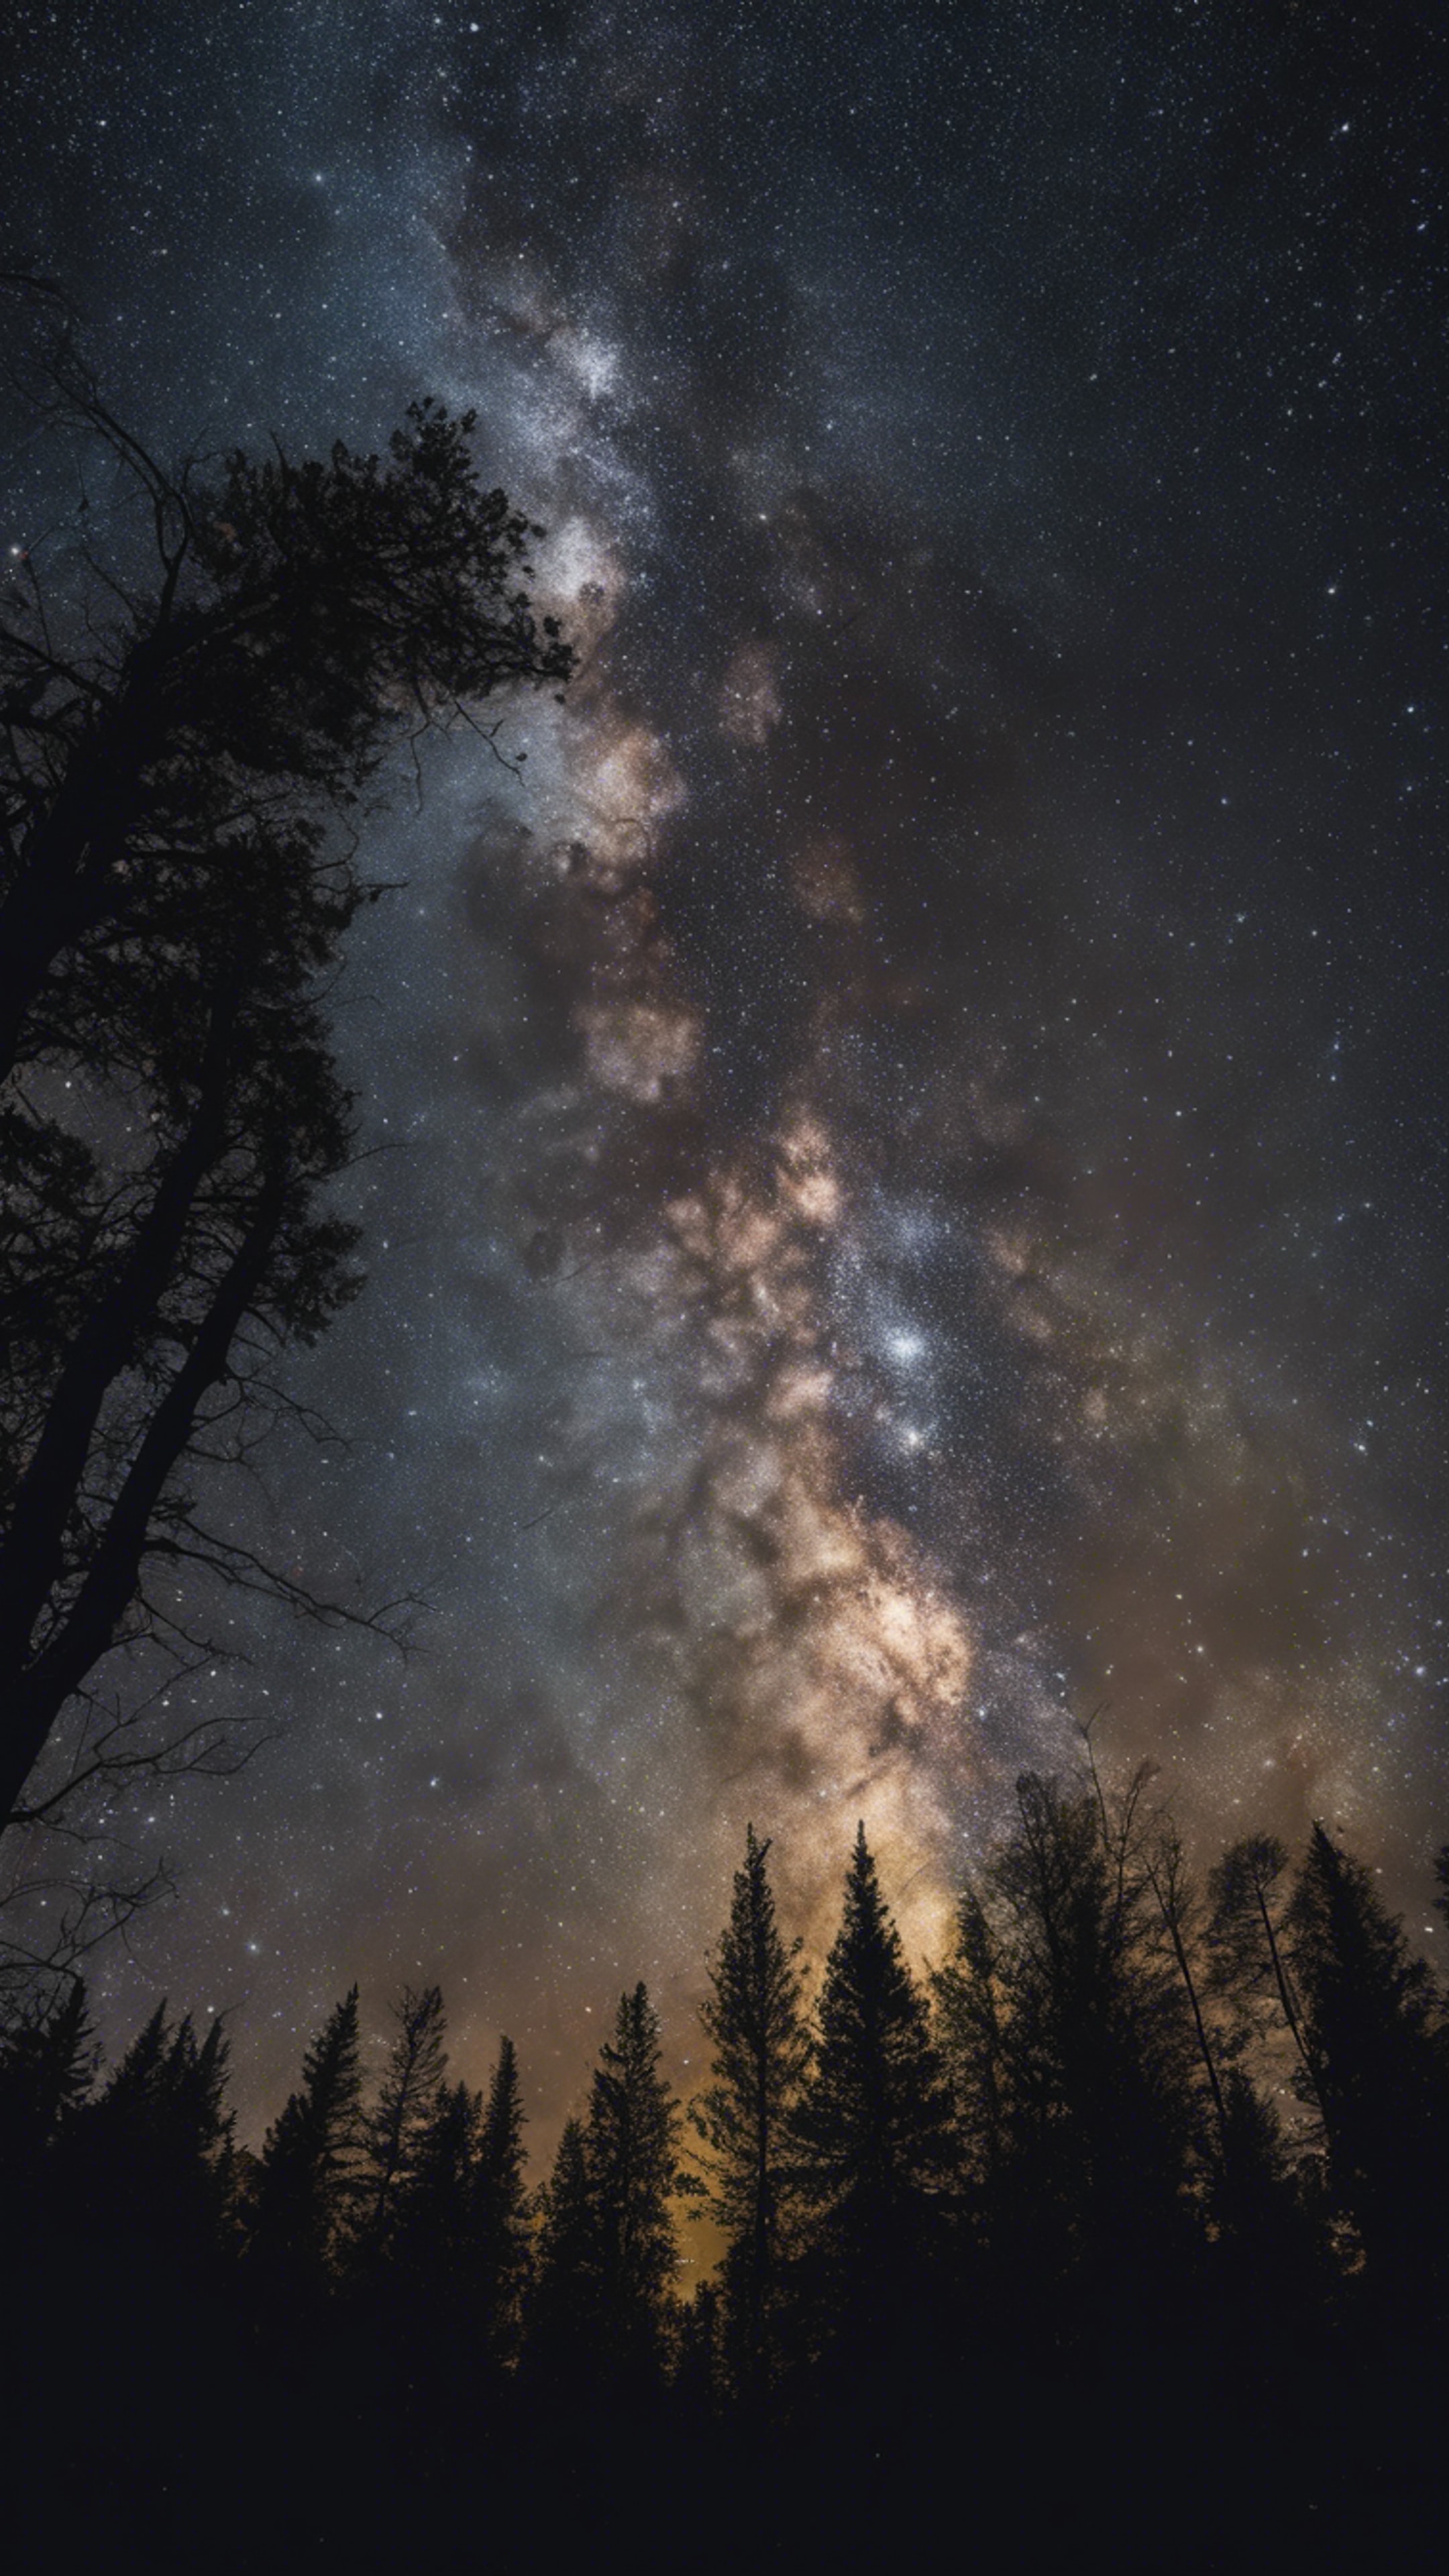 An astrophotograph showcasing the radiant Milky Way, against the contrast of a dark forest silhouette. Tapéta[89bcc876a6704e52b700]